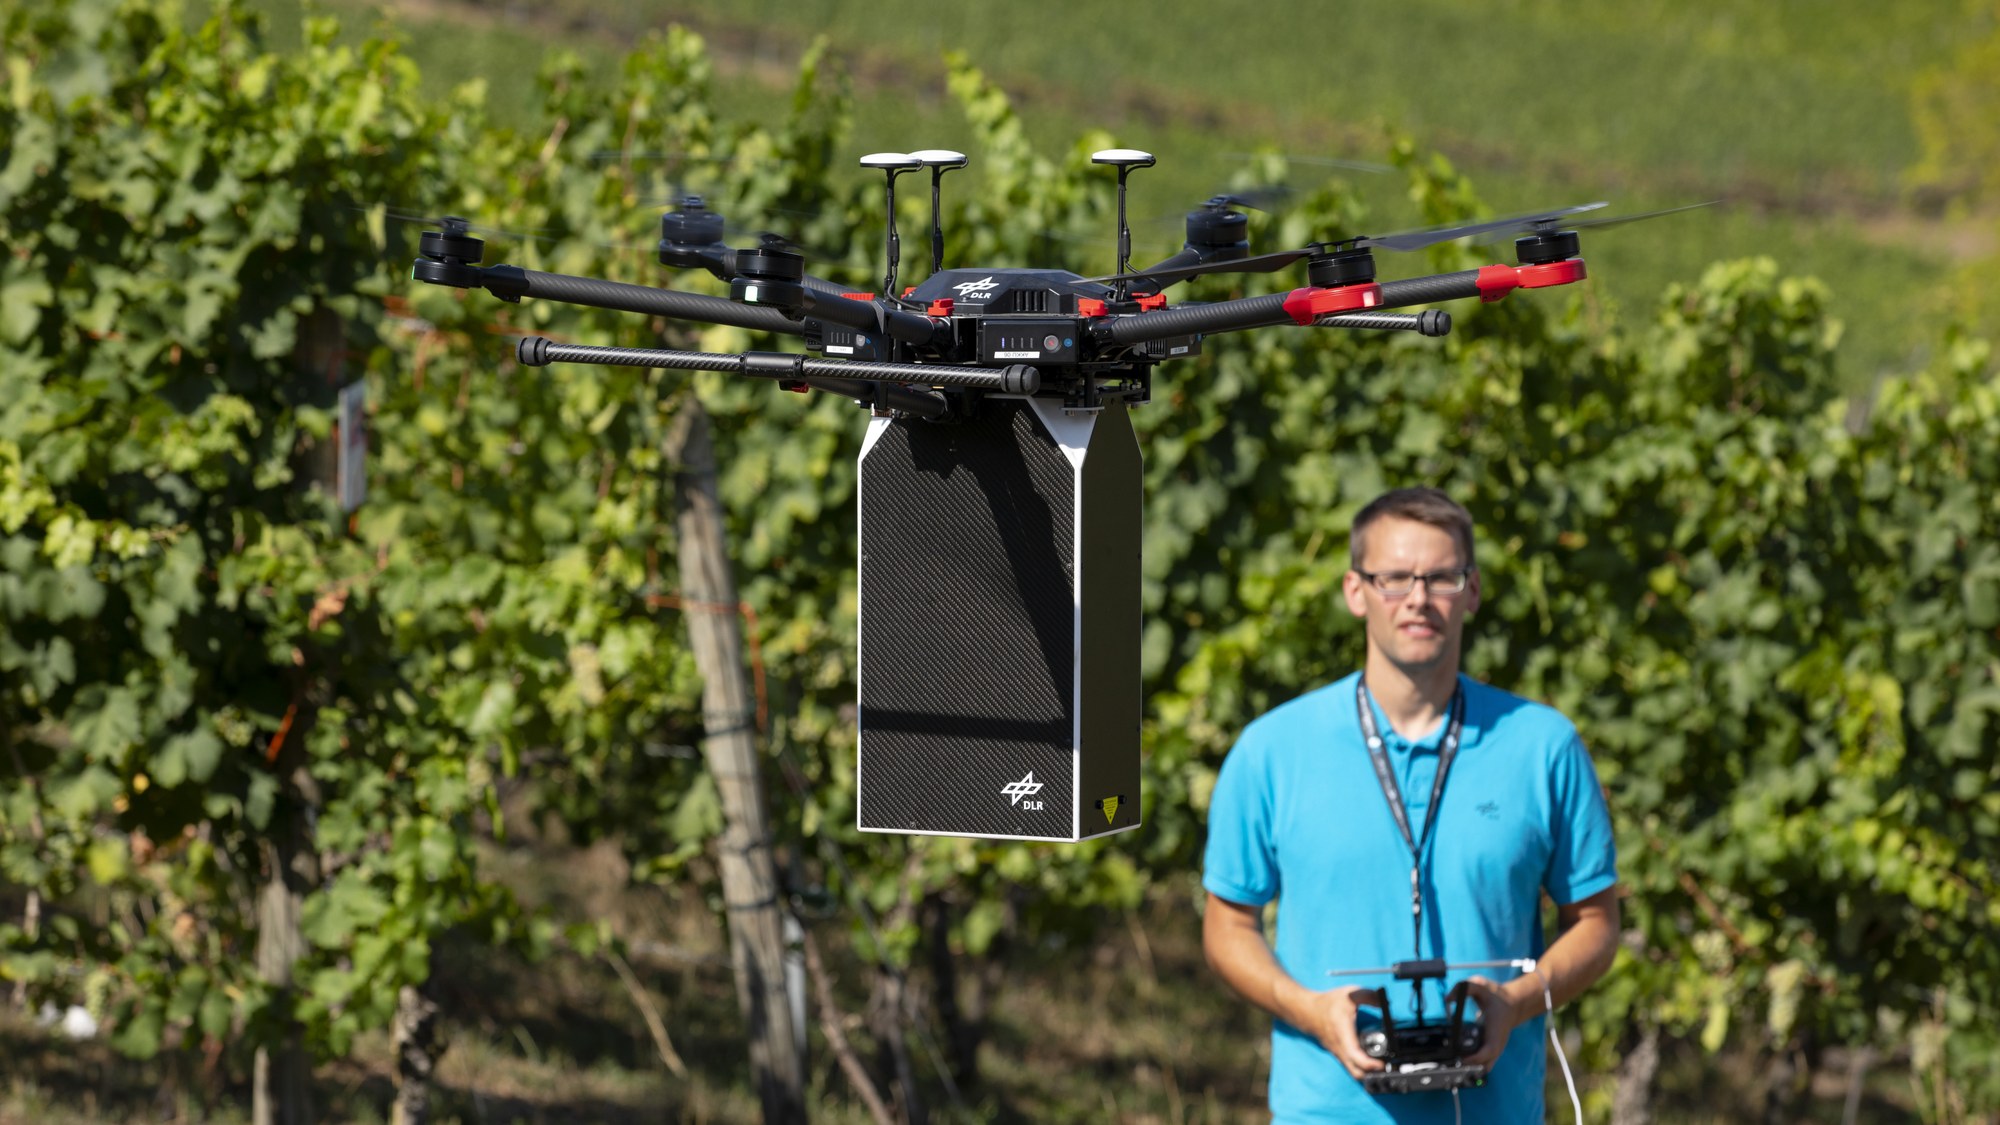 Smart farming – drone-based systems for agriculture